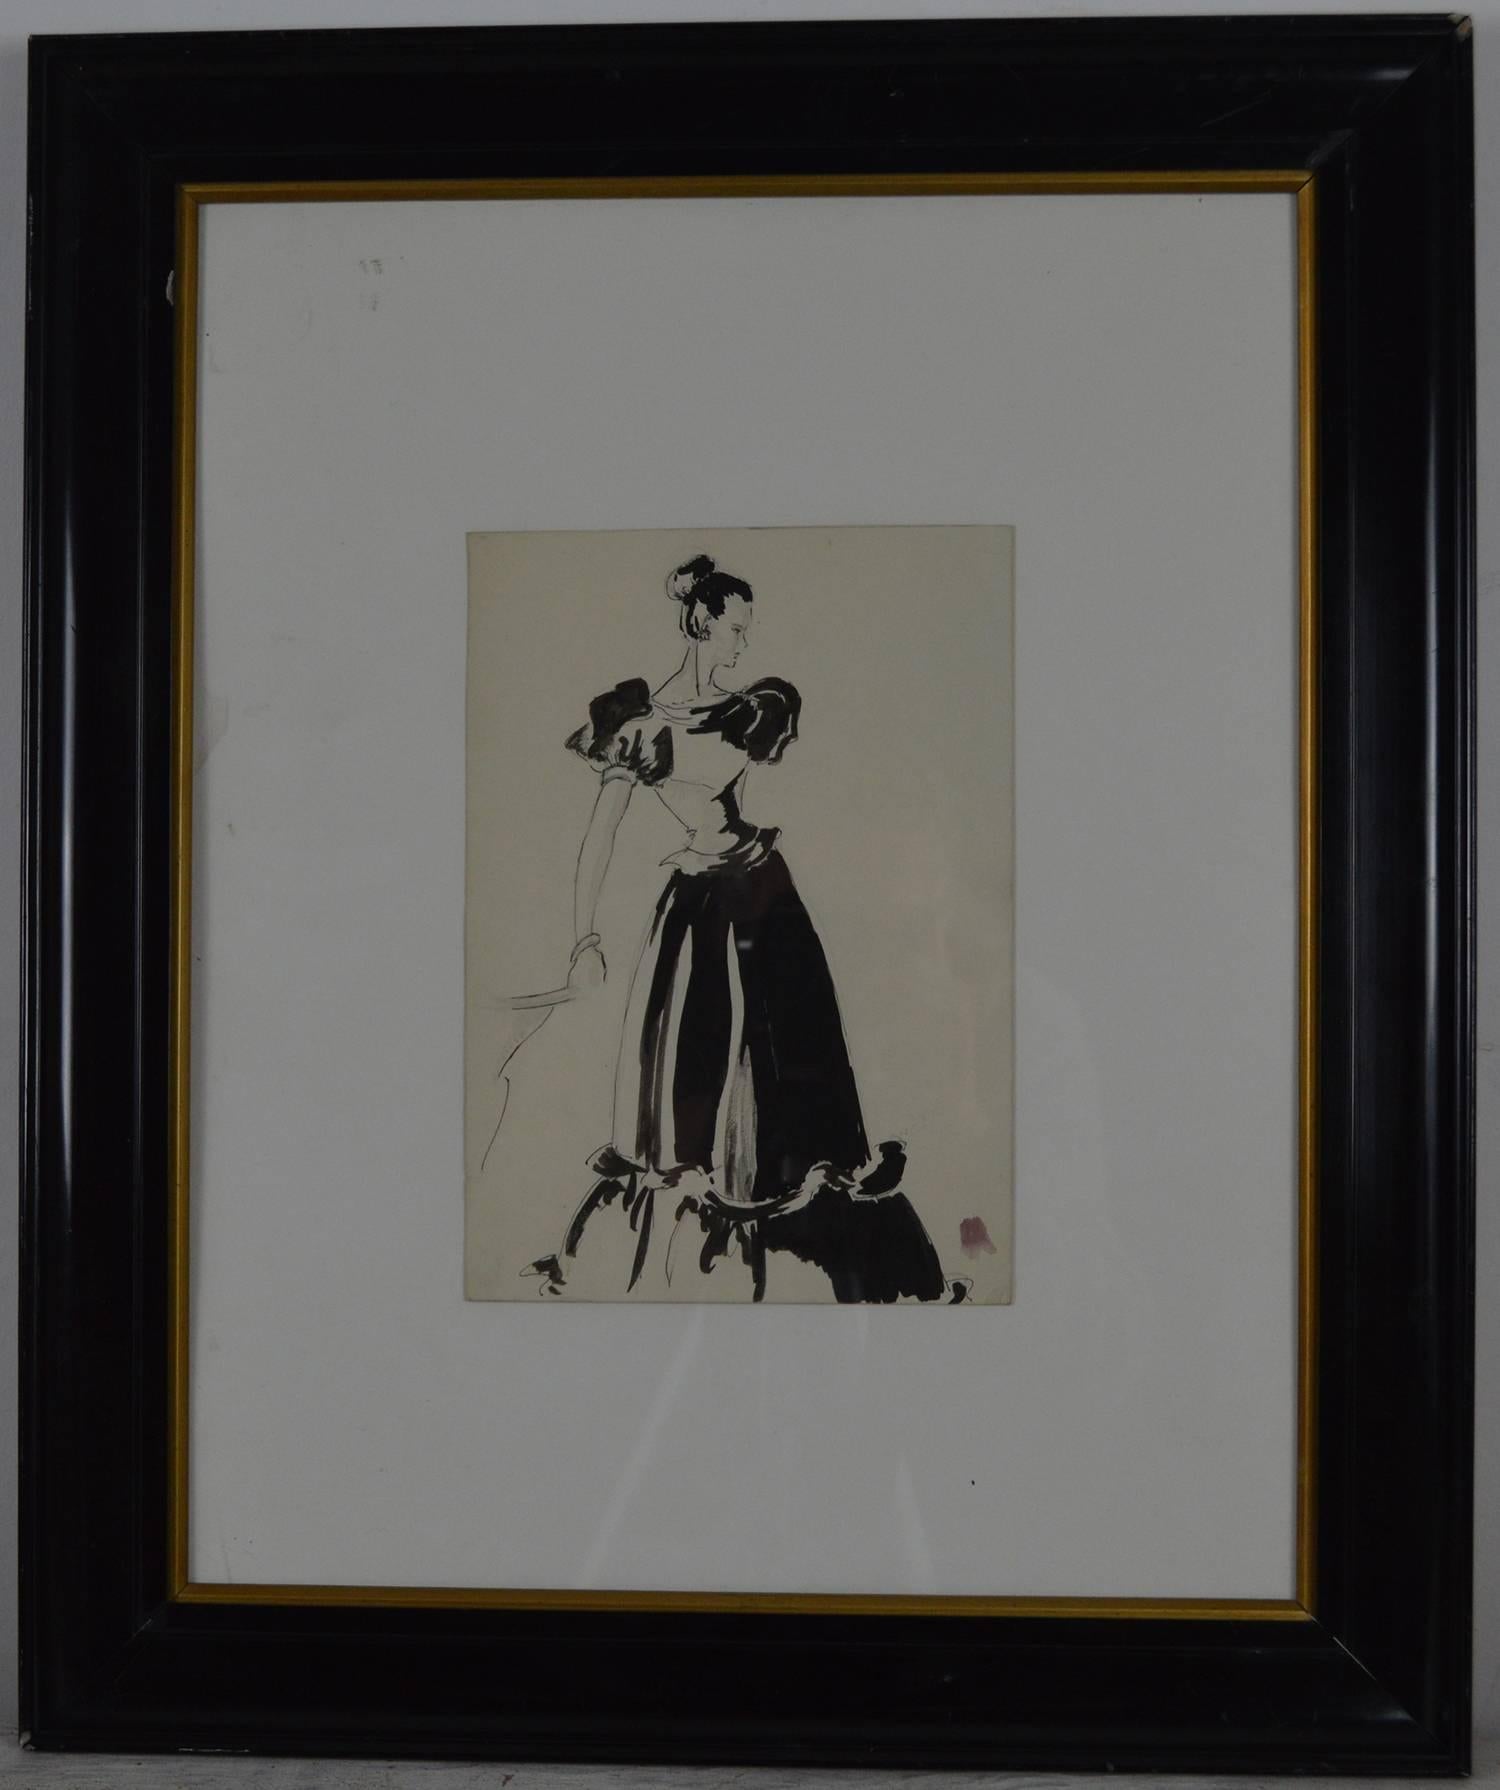 Wonderful pen and ink drawing by Pat Kerr, 1946. So evocative of the 1940s.

On card. Unsigned.

Presented in the original black lacquer frame.

Drawn for A & C Kay, New Bond St. London.

  

